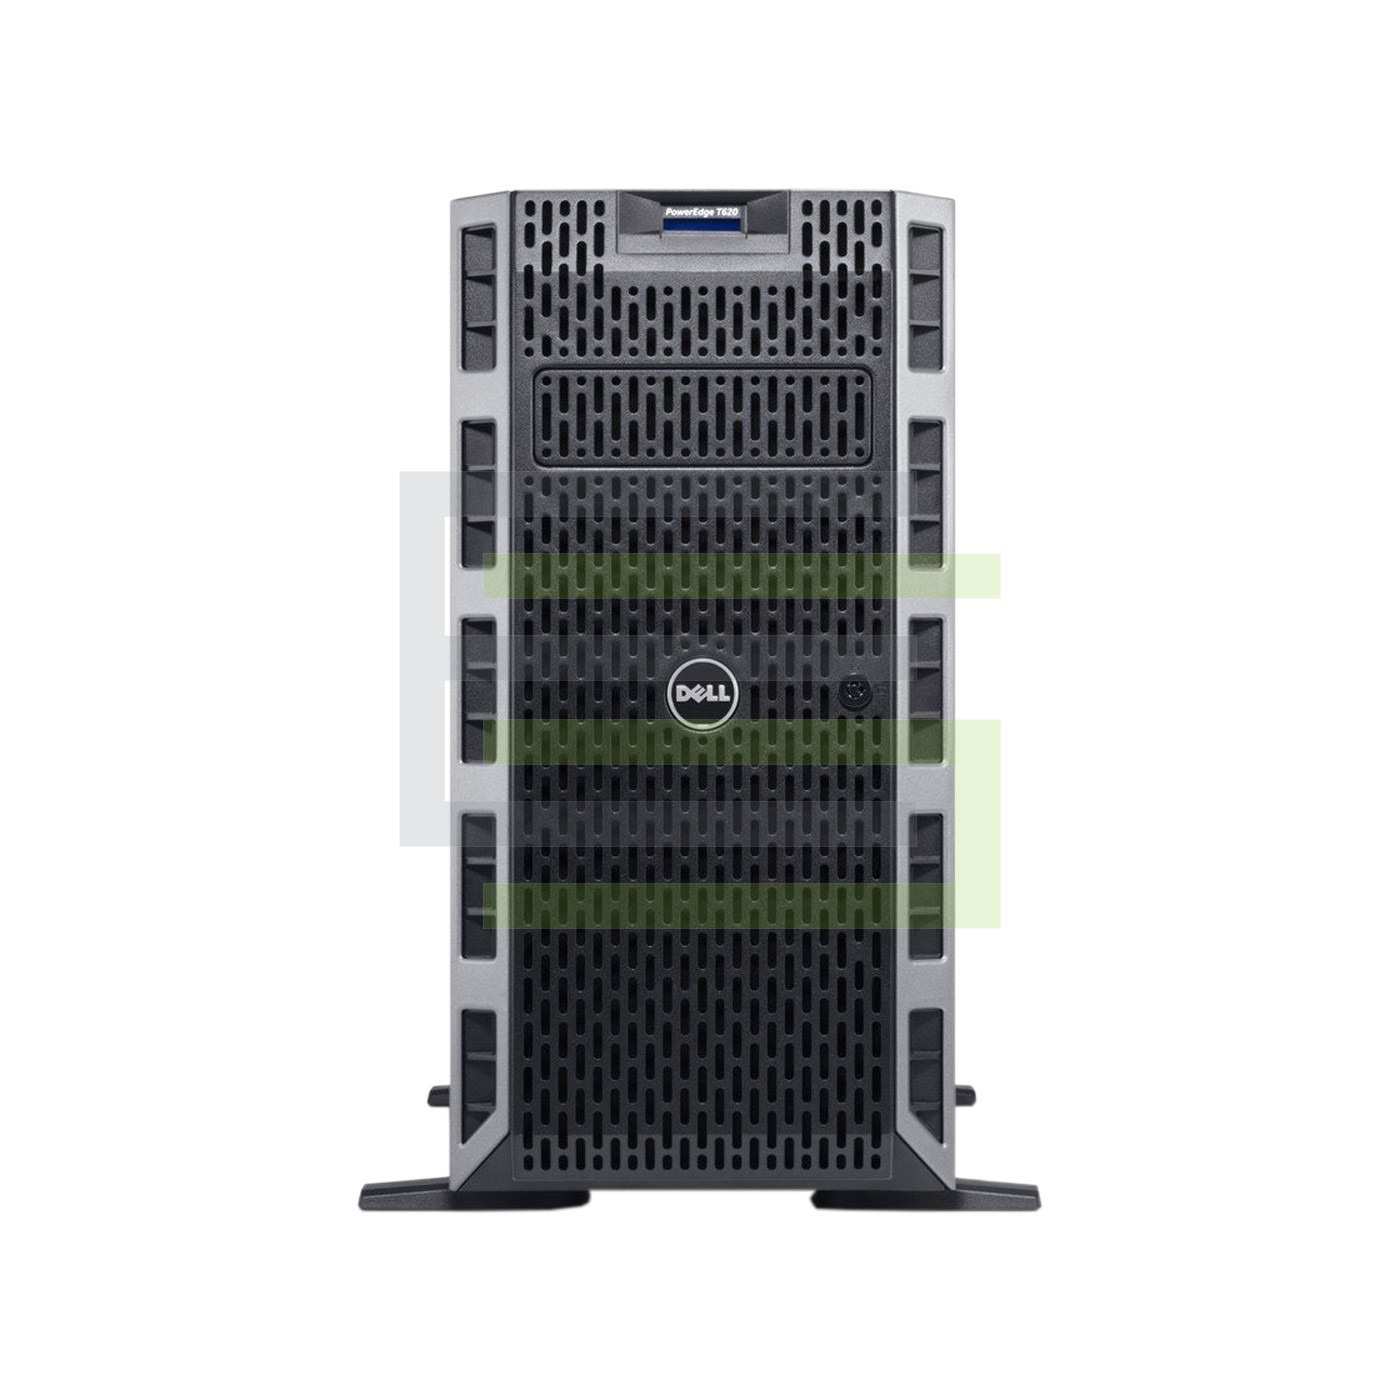 Refurbished Dell PowerEdge T620 Tower Servers - In Stock